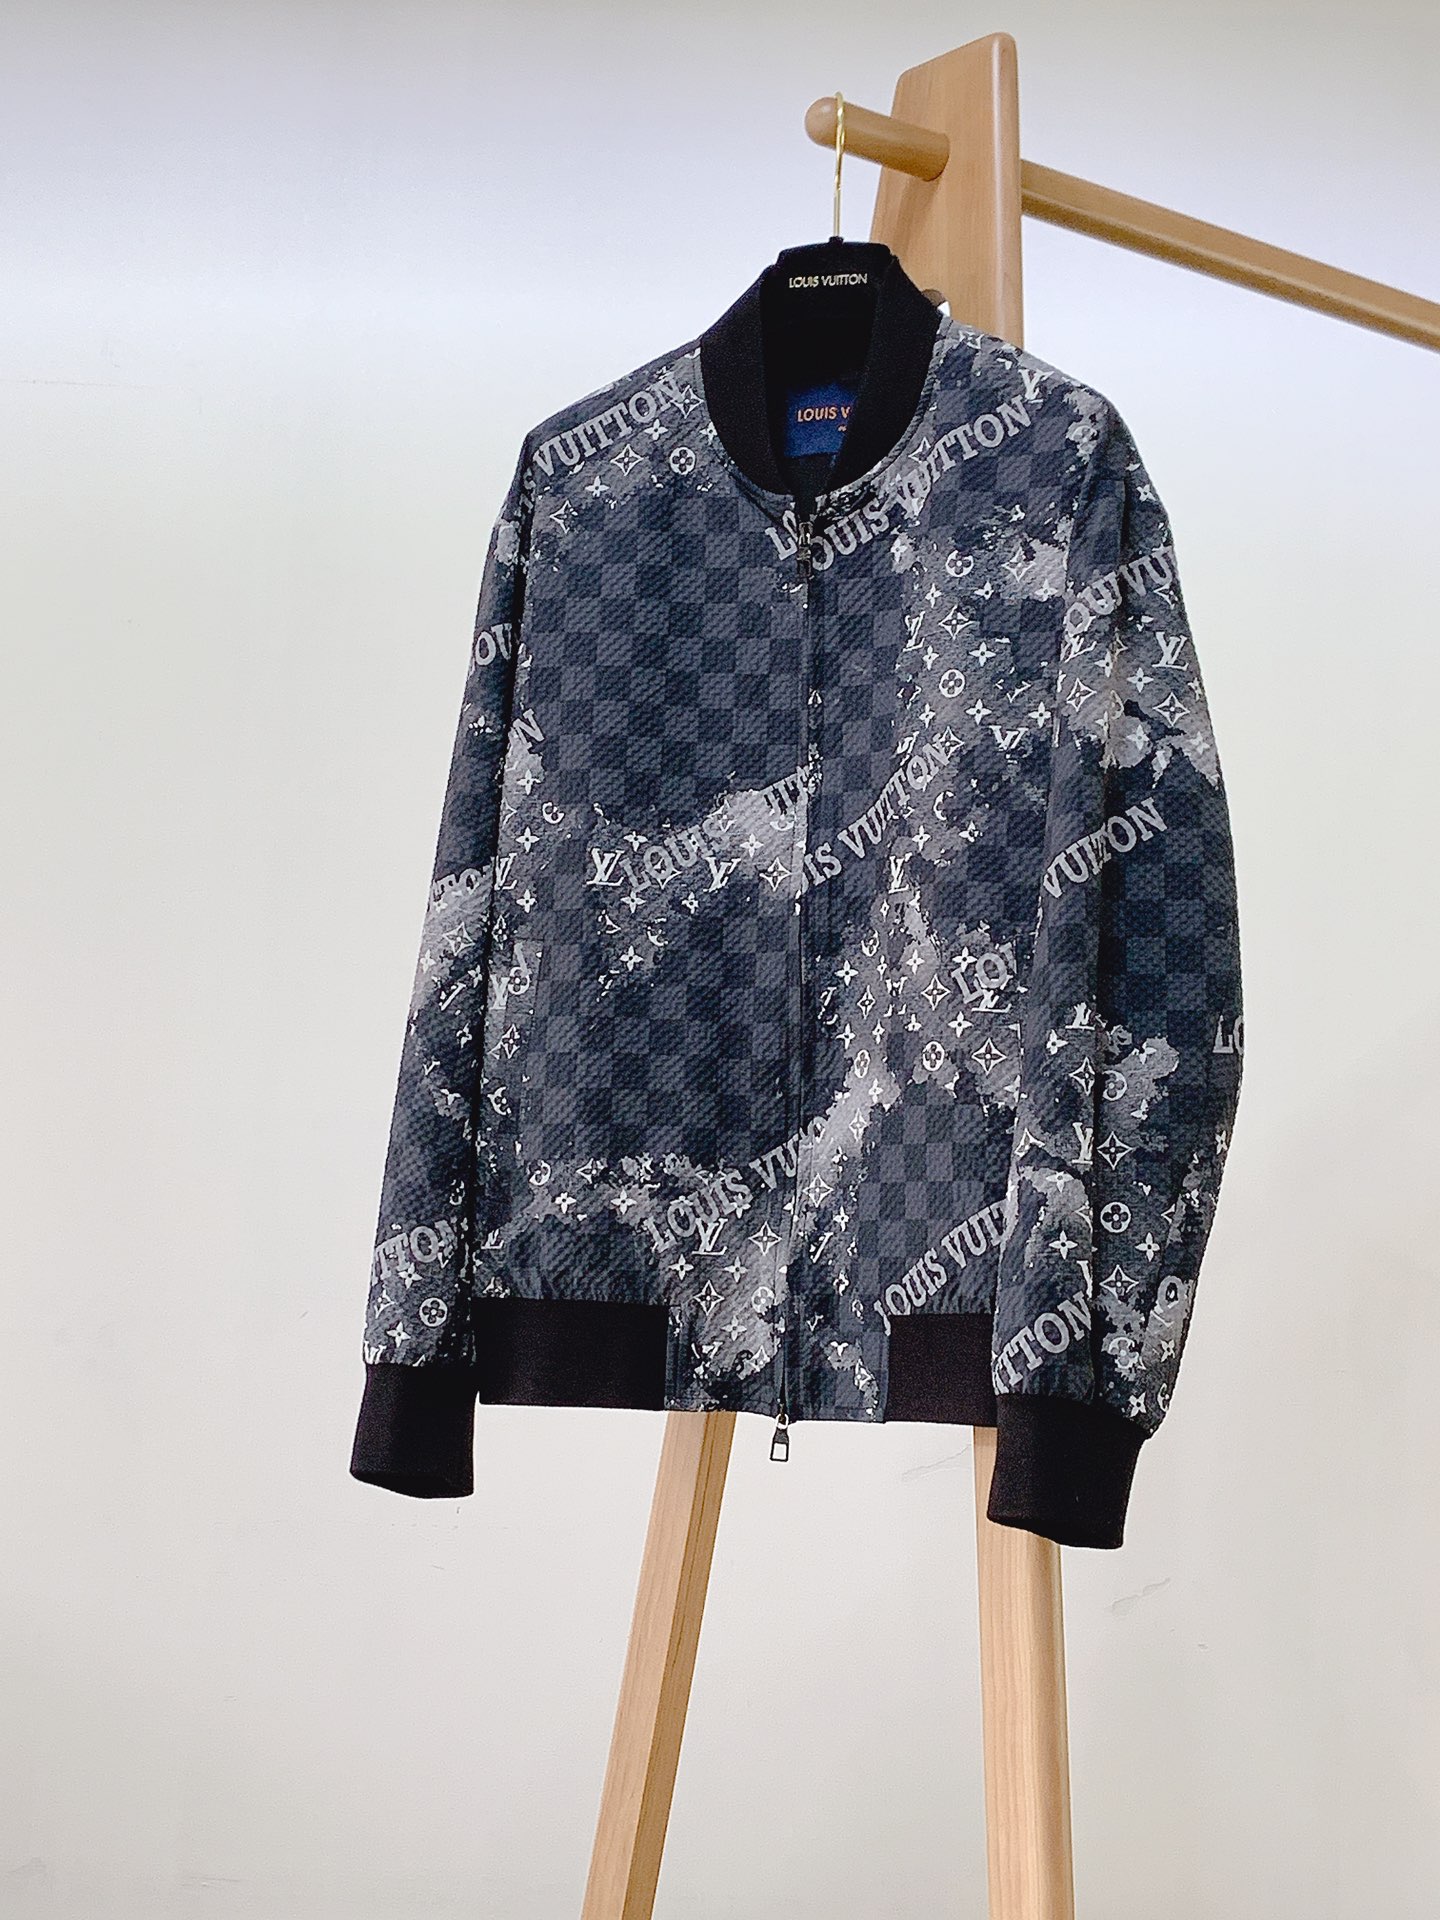 Louis Vuitton Clothing Coats & Jackets Sewing Cotton Knitting Polyester Spring Collection Fashion Casual